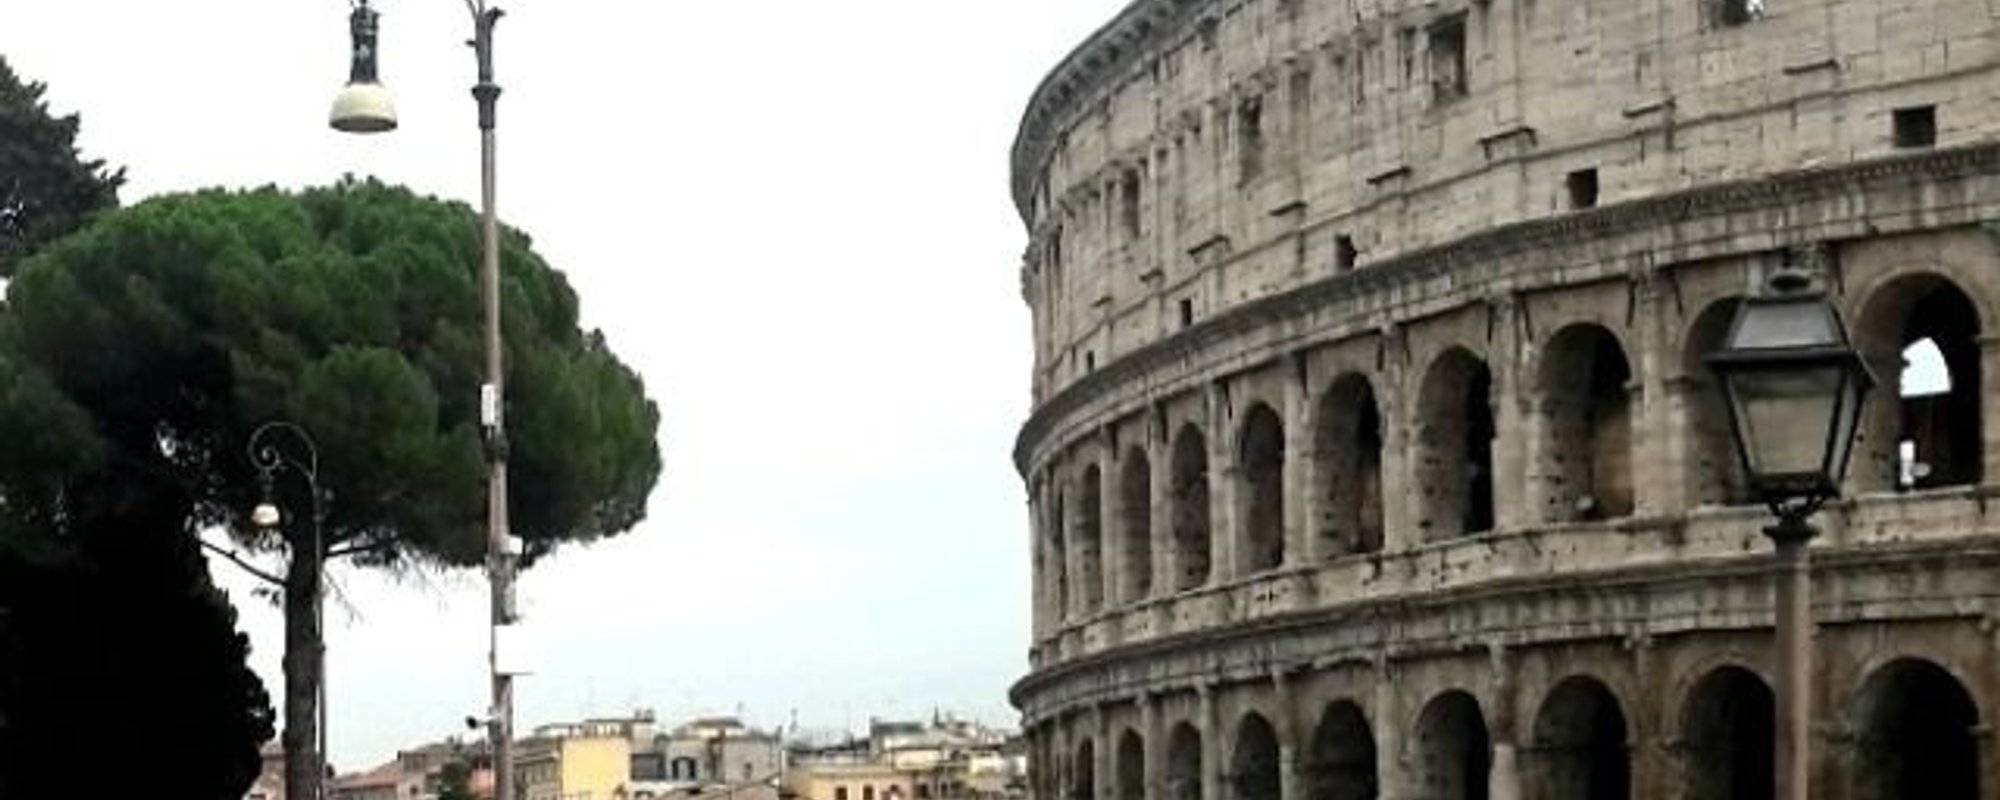 Origins of the Colosseum

Even after the decadent Roman emperor Nero took his own ...